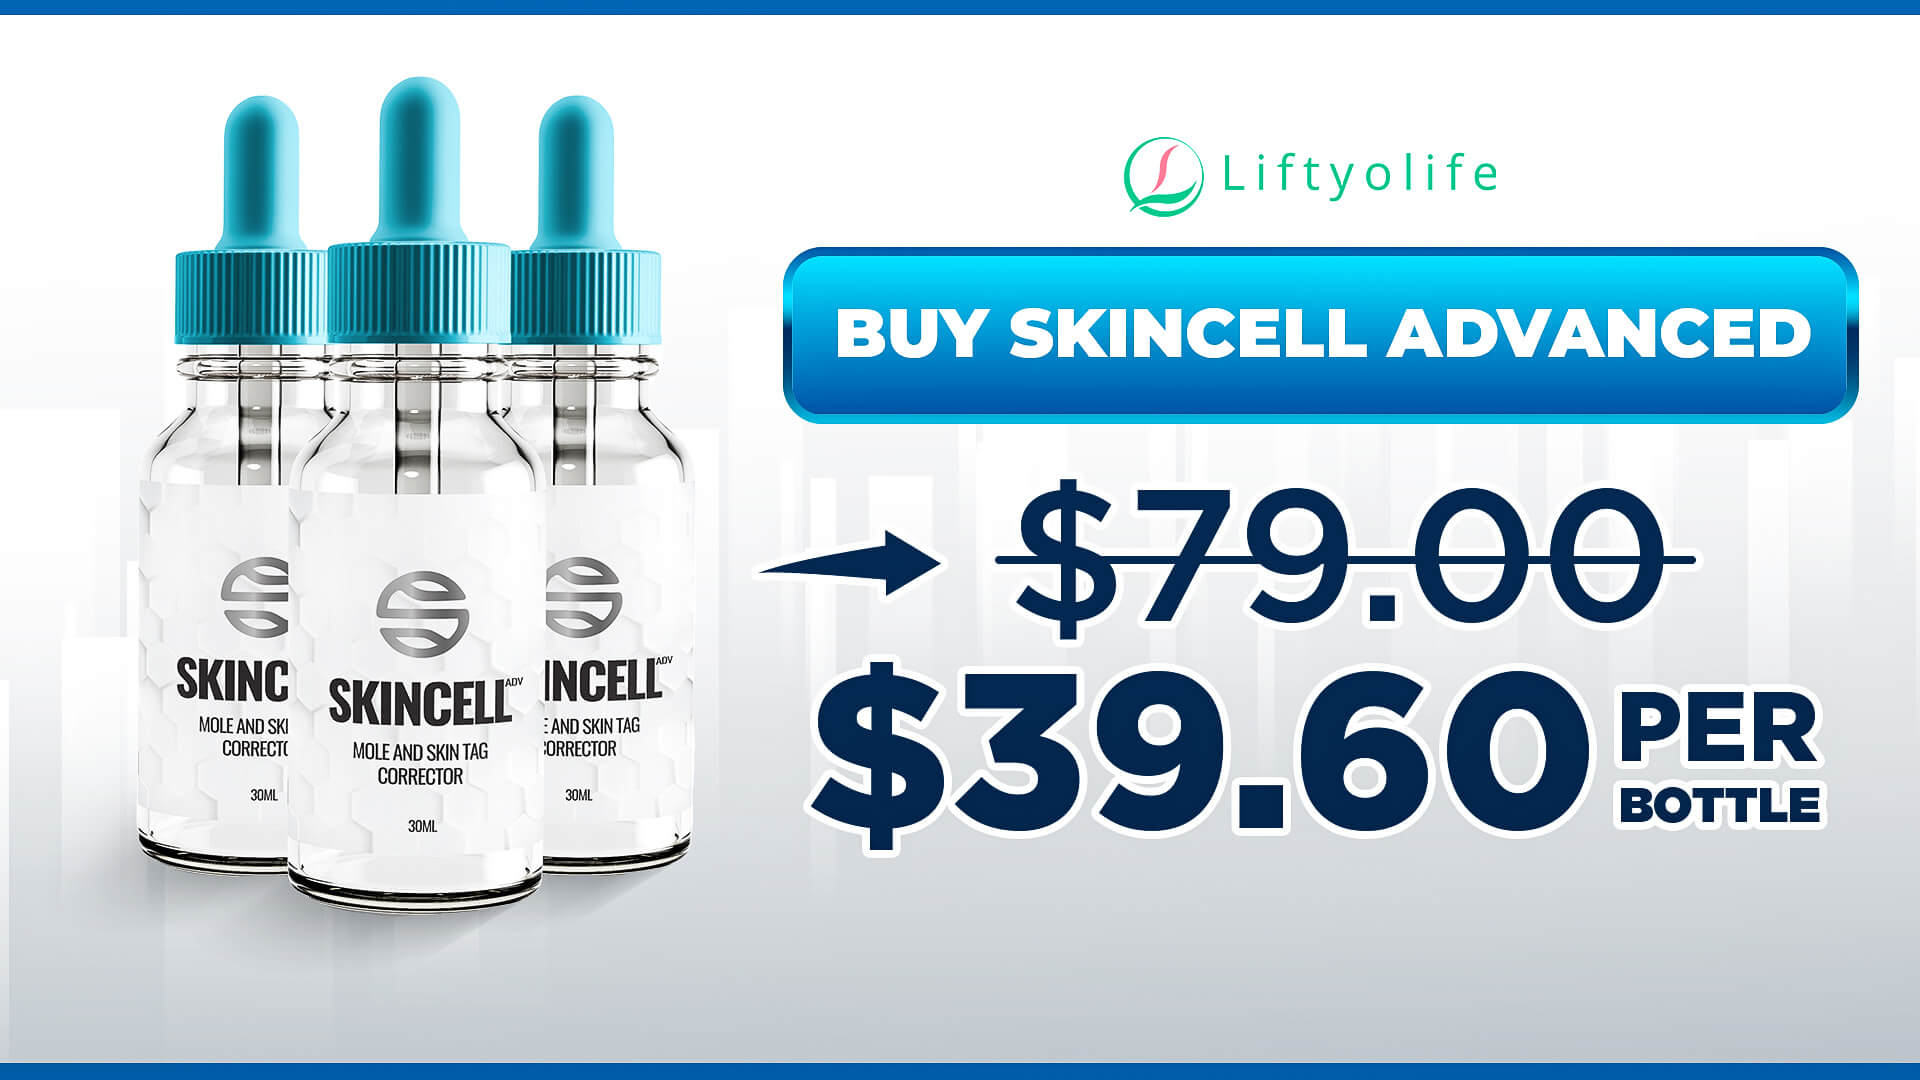 How Much Is Skincell Advanced?